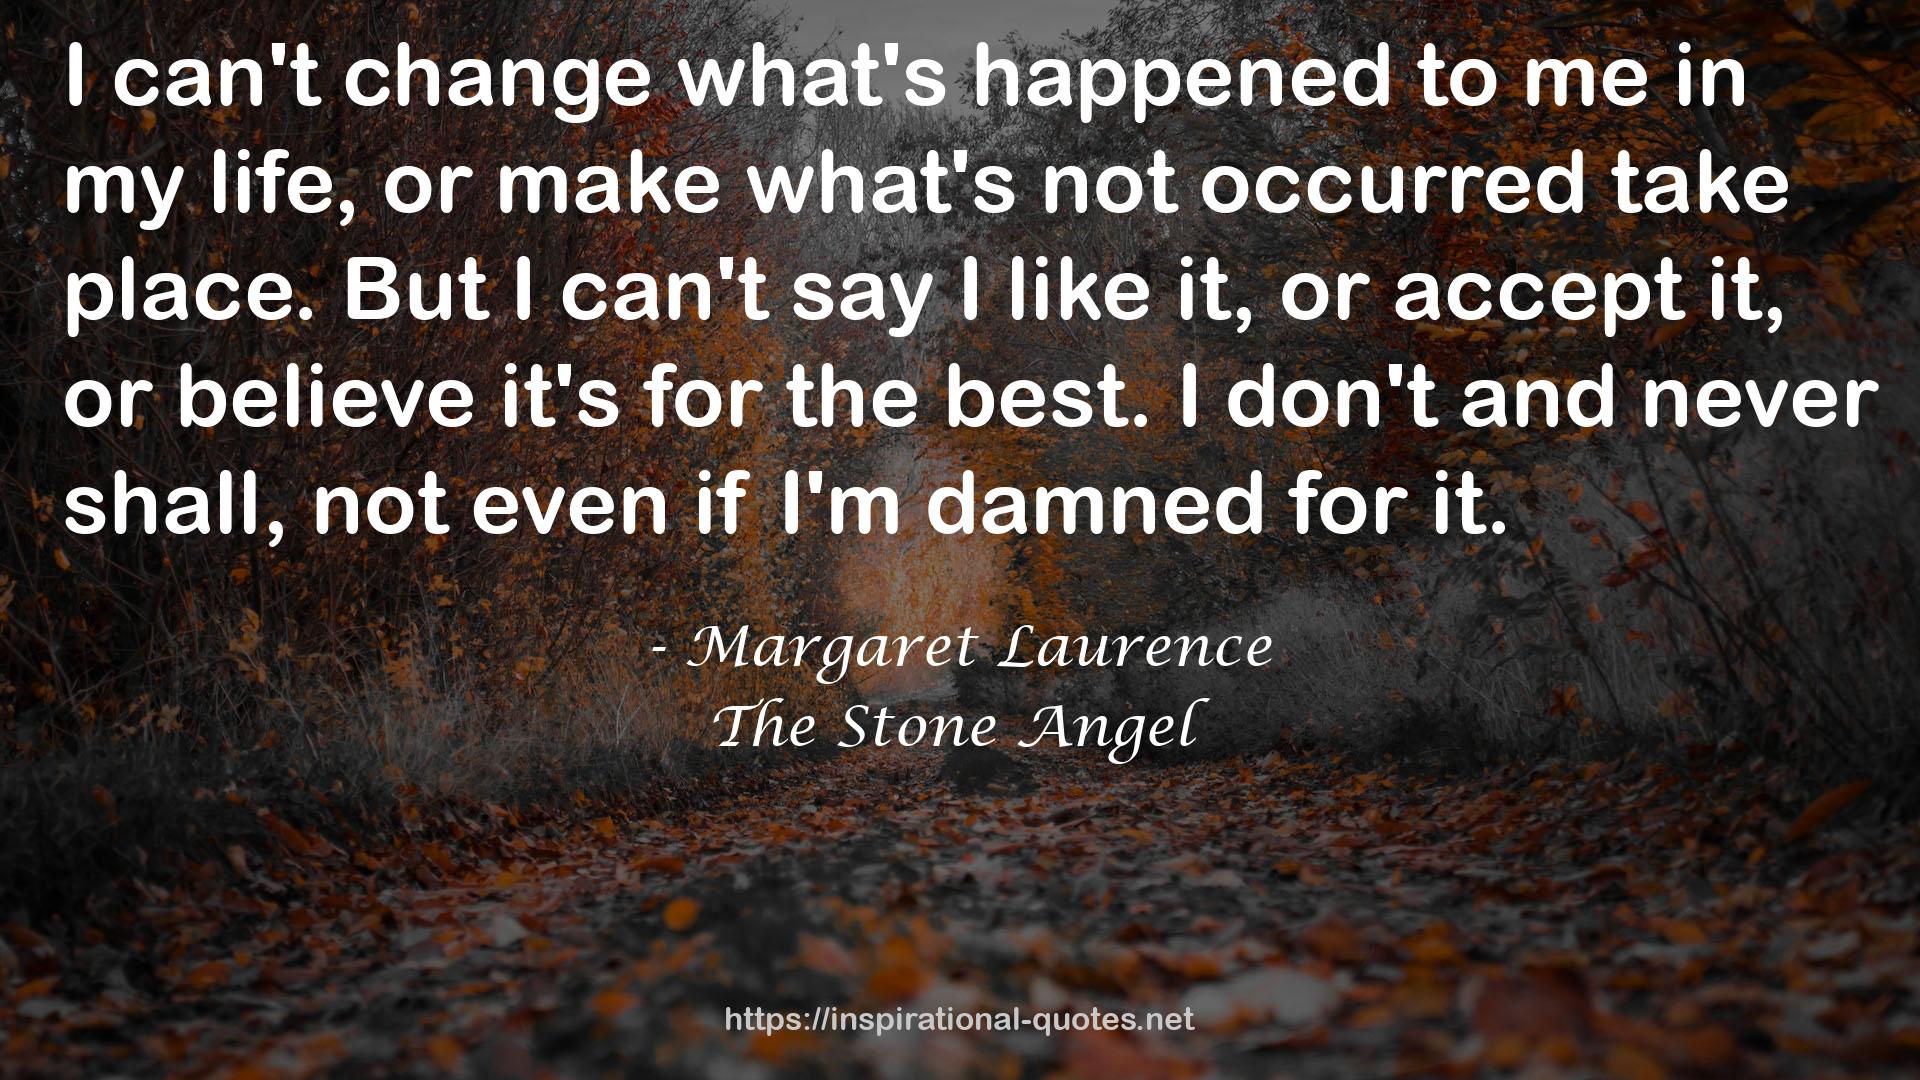 Margaret Laurence QUOTES